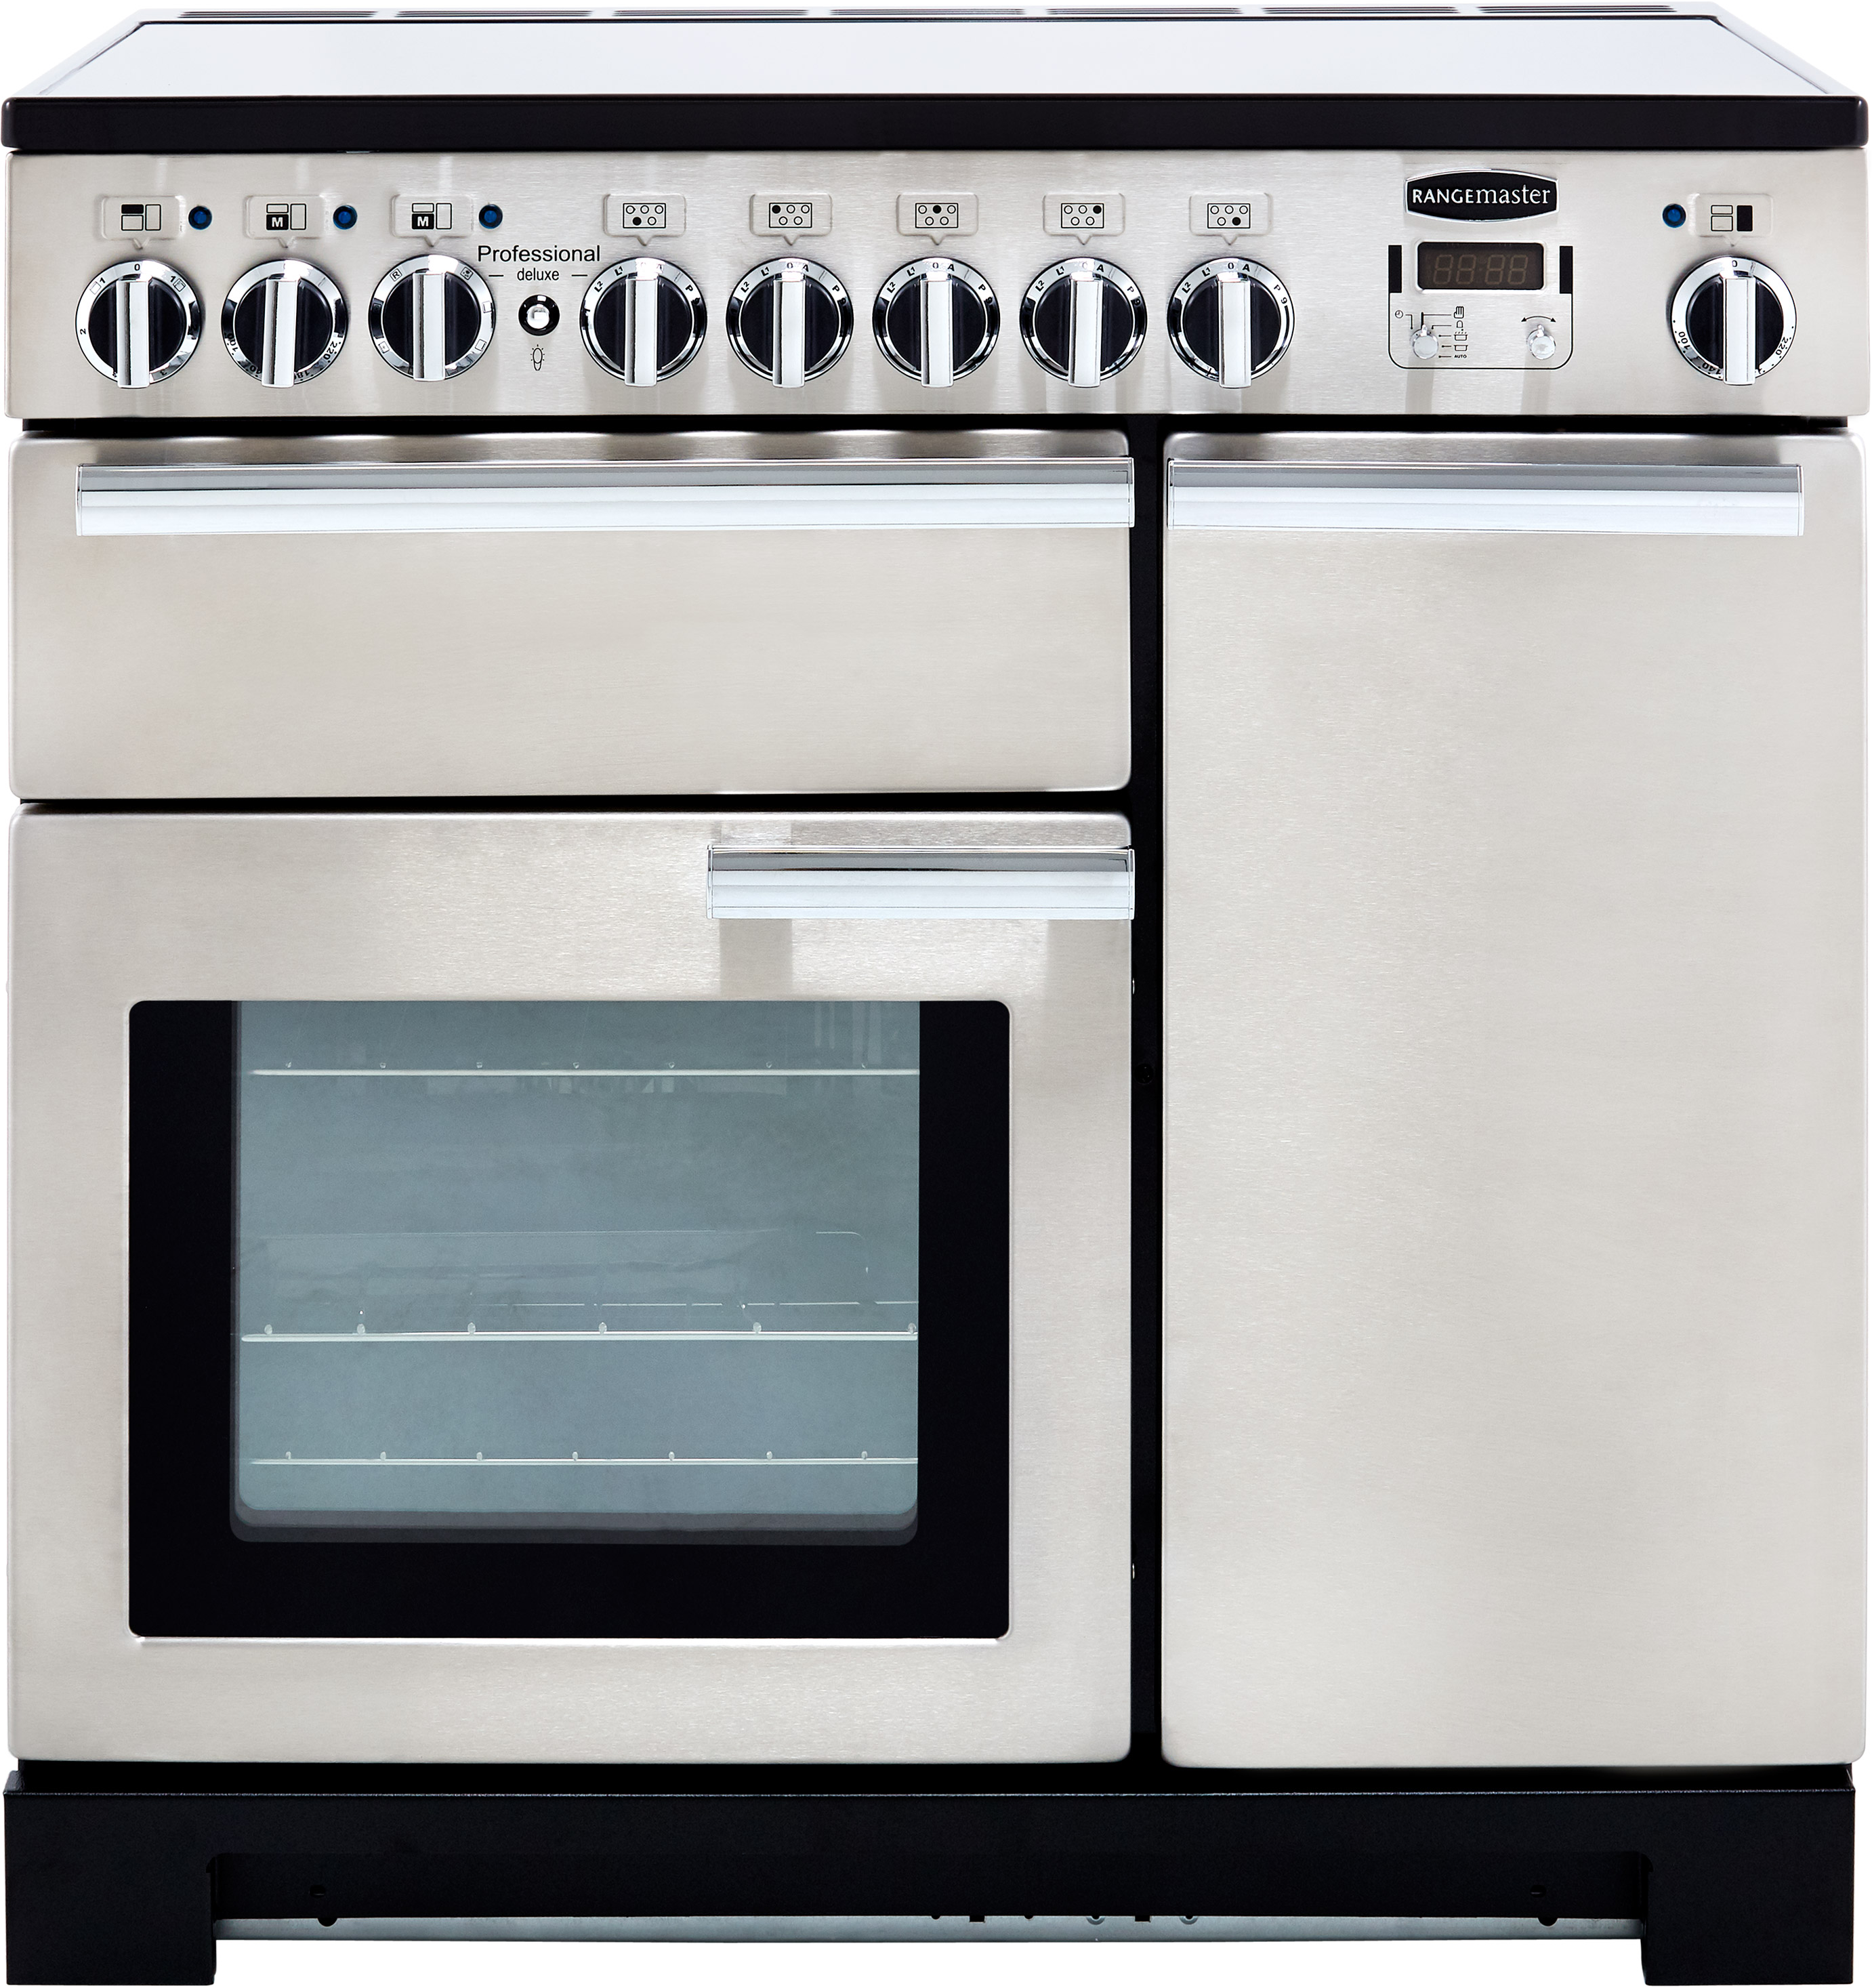 Rangemaster Professional Deluxe PDL90EISS/C 90cm Electric Range Cooker with Induction Hob - Stainless Steel / Chrome - A/A Rated, Stainless Steel